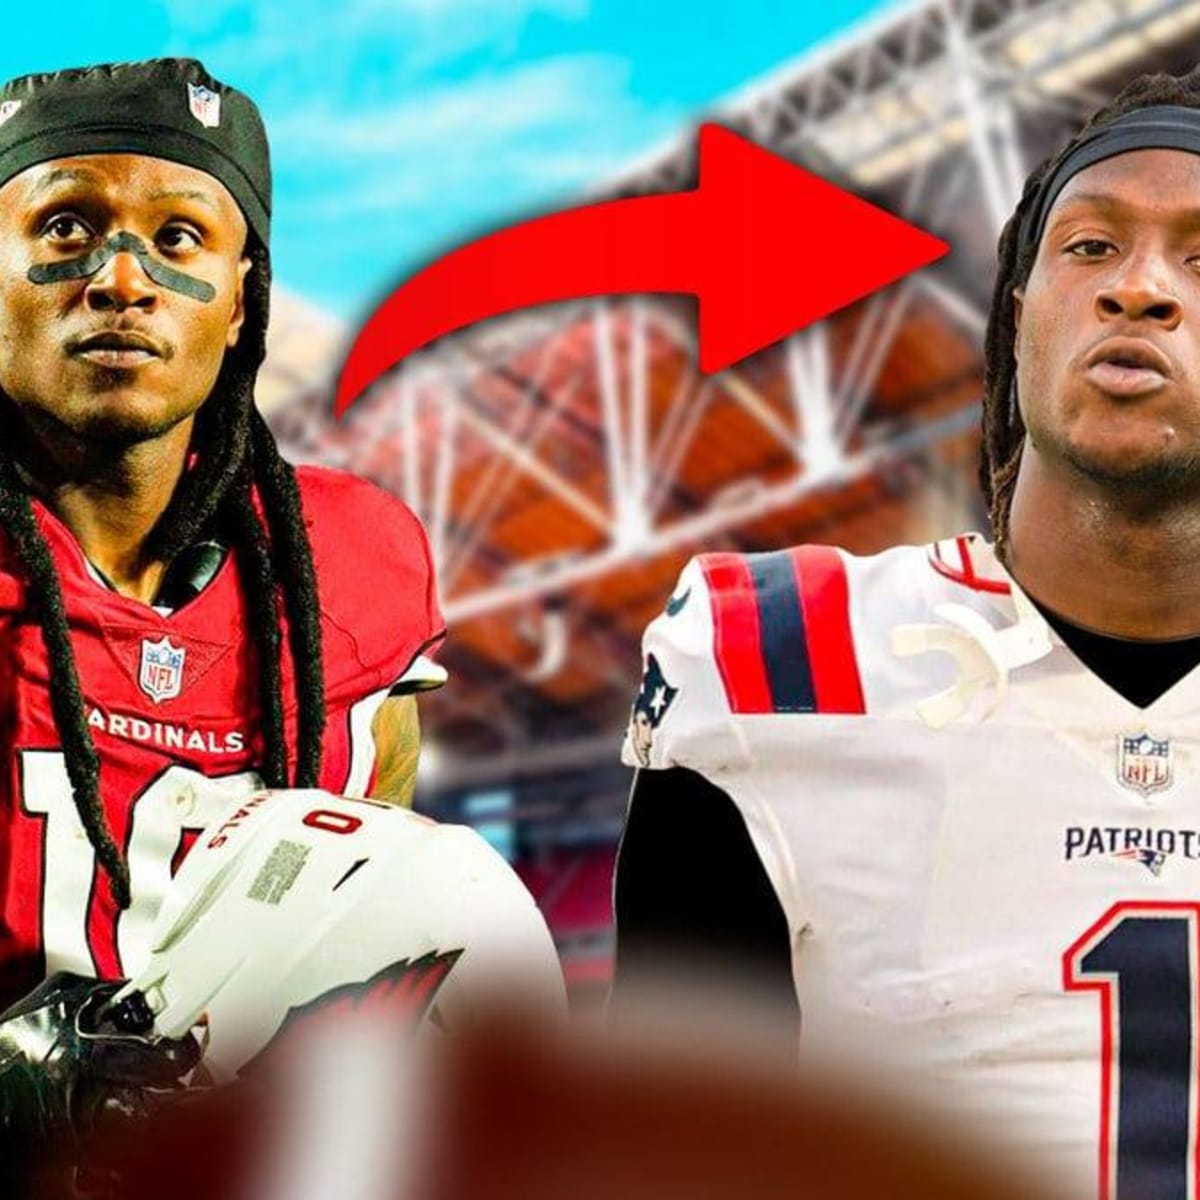 Patriots reportedly 'sound like the leaders' to land DeAndre Hopkins